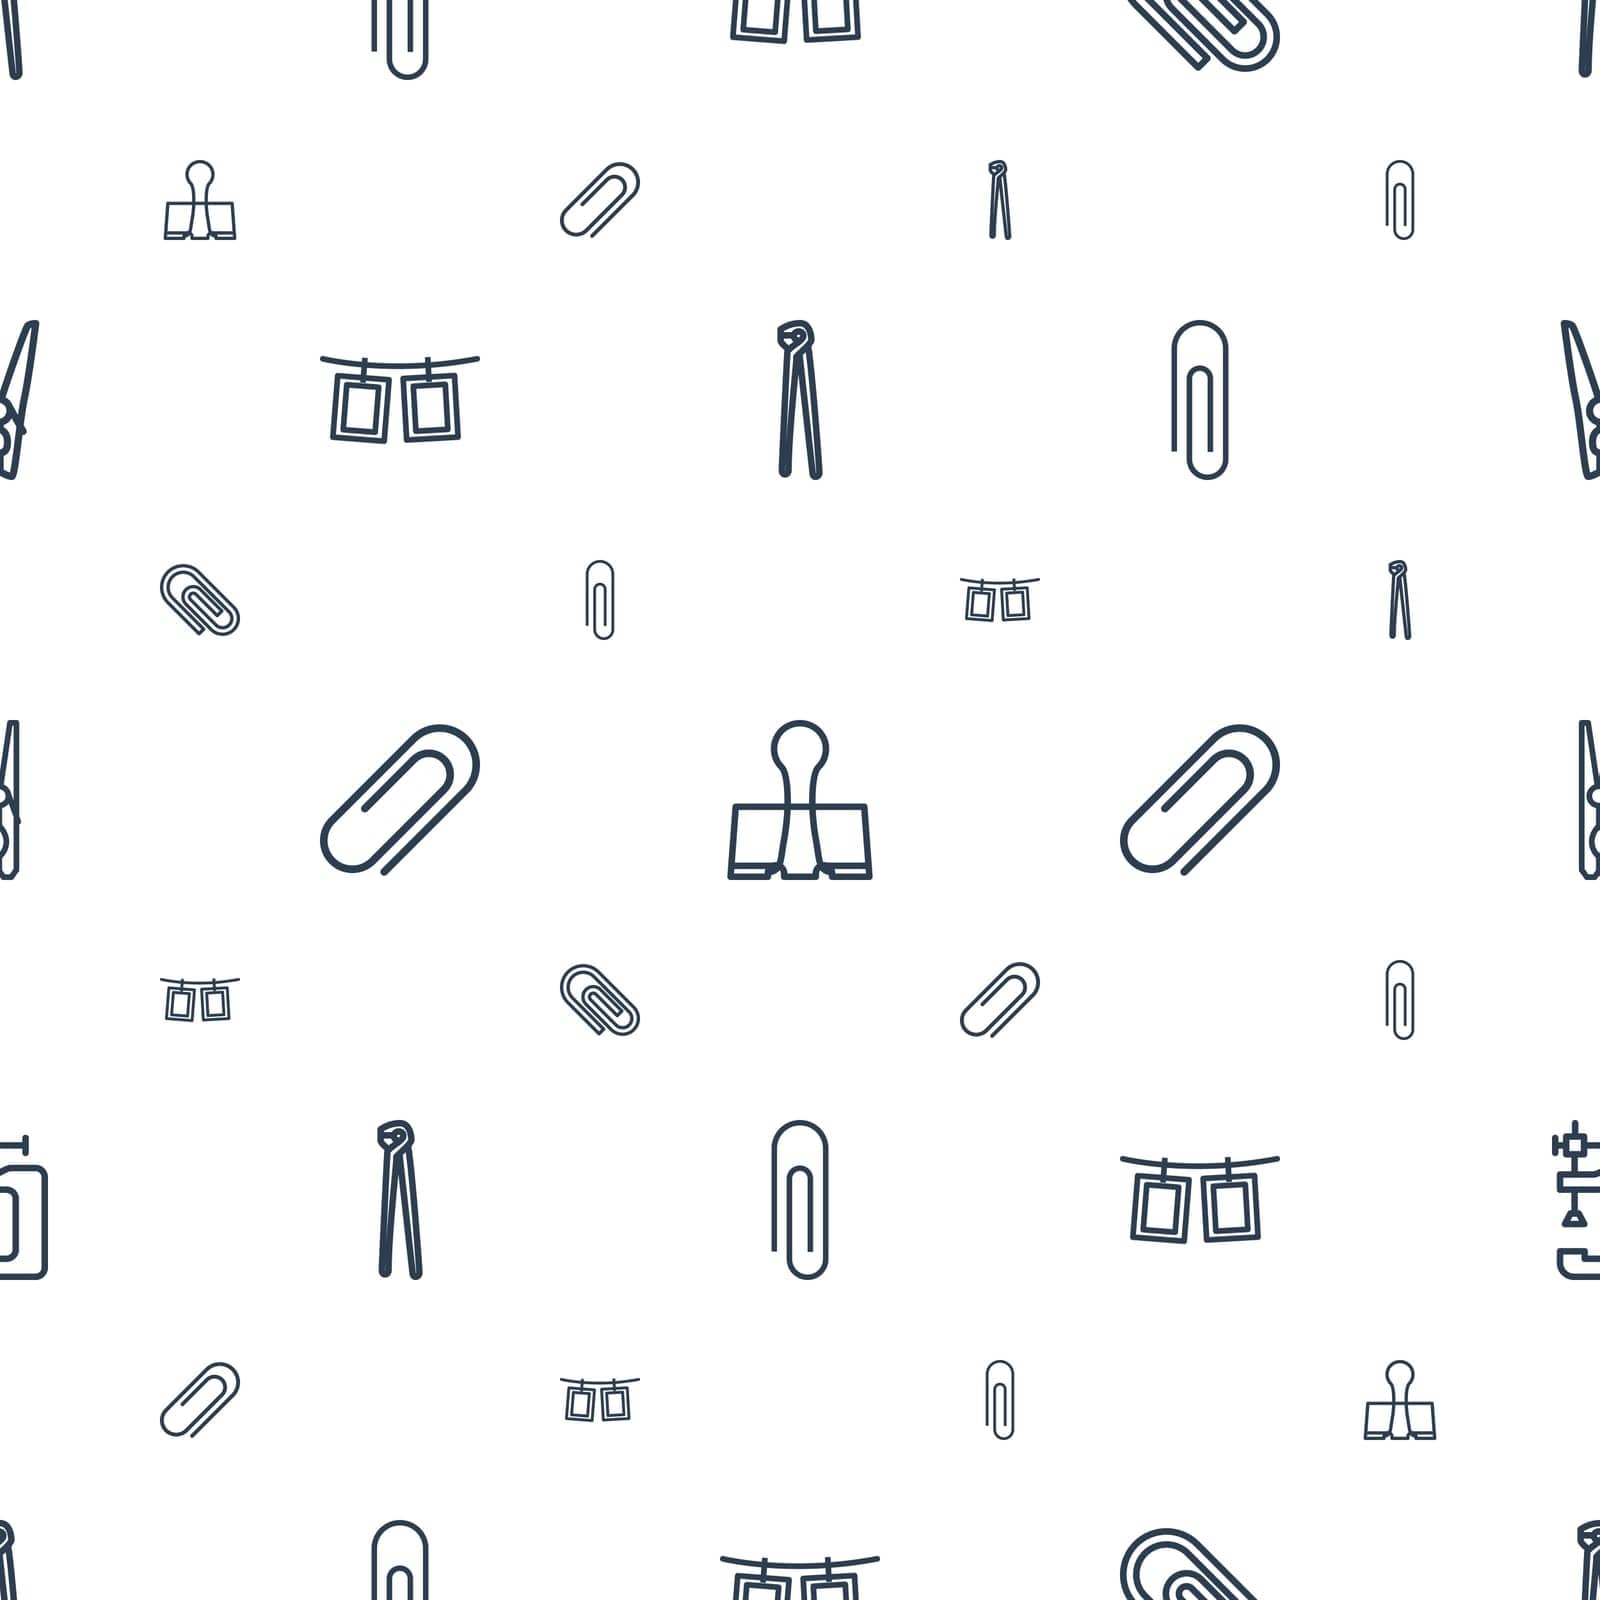 symbol,steel,hang,education,concept,document,rope,pattern,icon,sign,isolated,pins,office,photos,hold,peg,pin,white,paper,school,laundry,design,pliers,vector,clamp,element,on,vice,business,tool,clothespin,background,silhouette,illustration,clip,object,cloth by ogqcorp